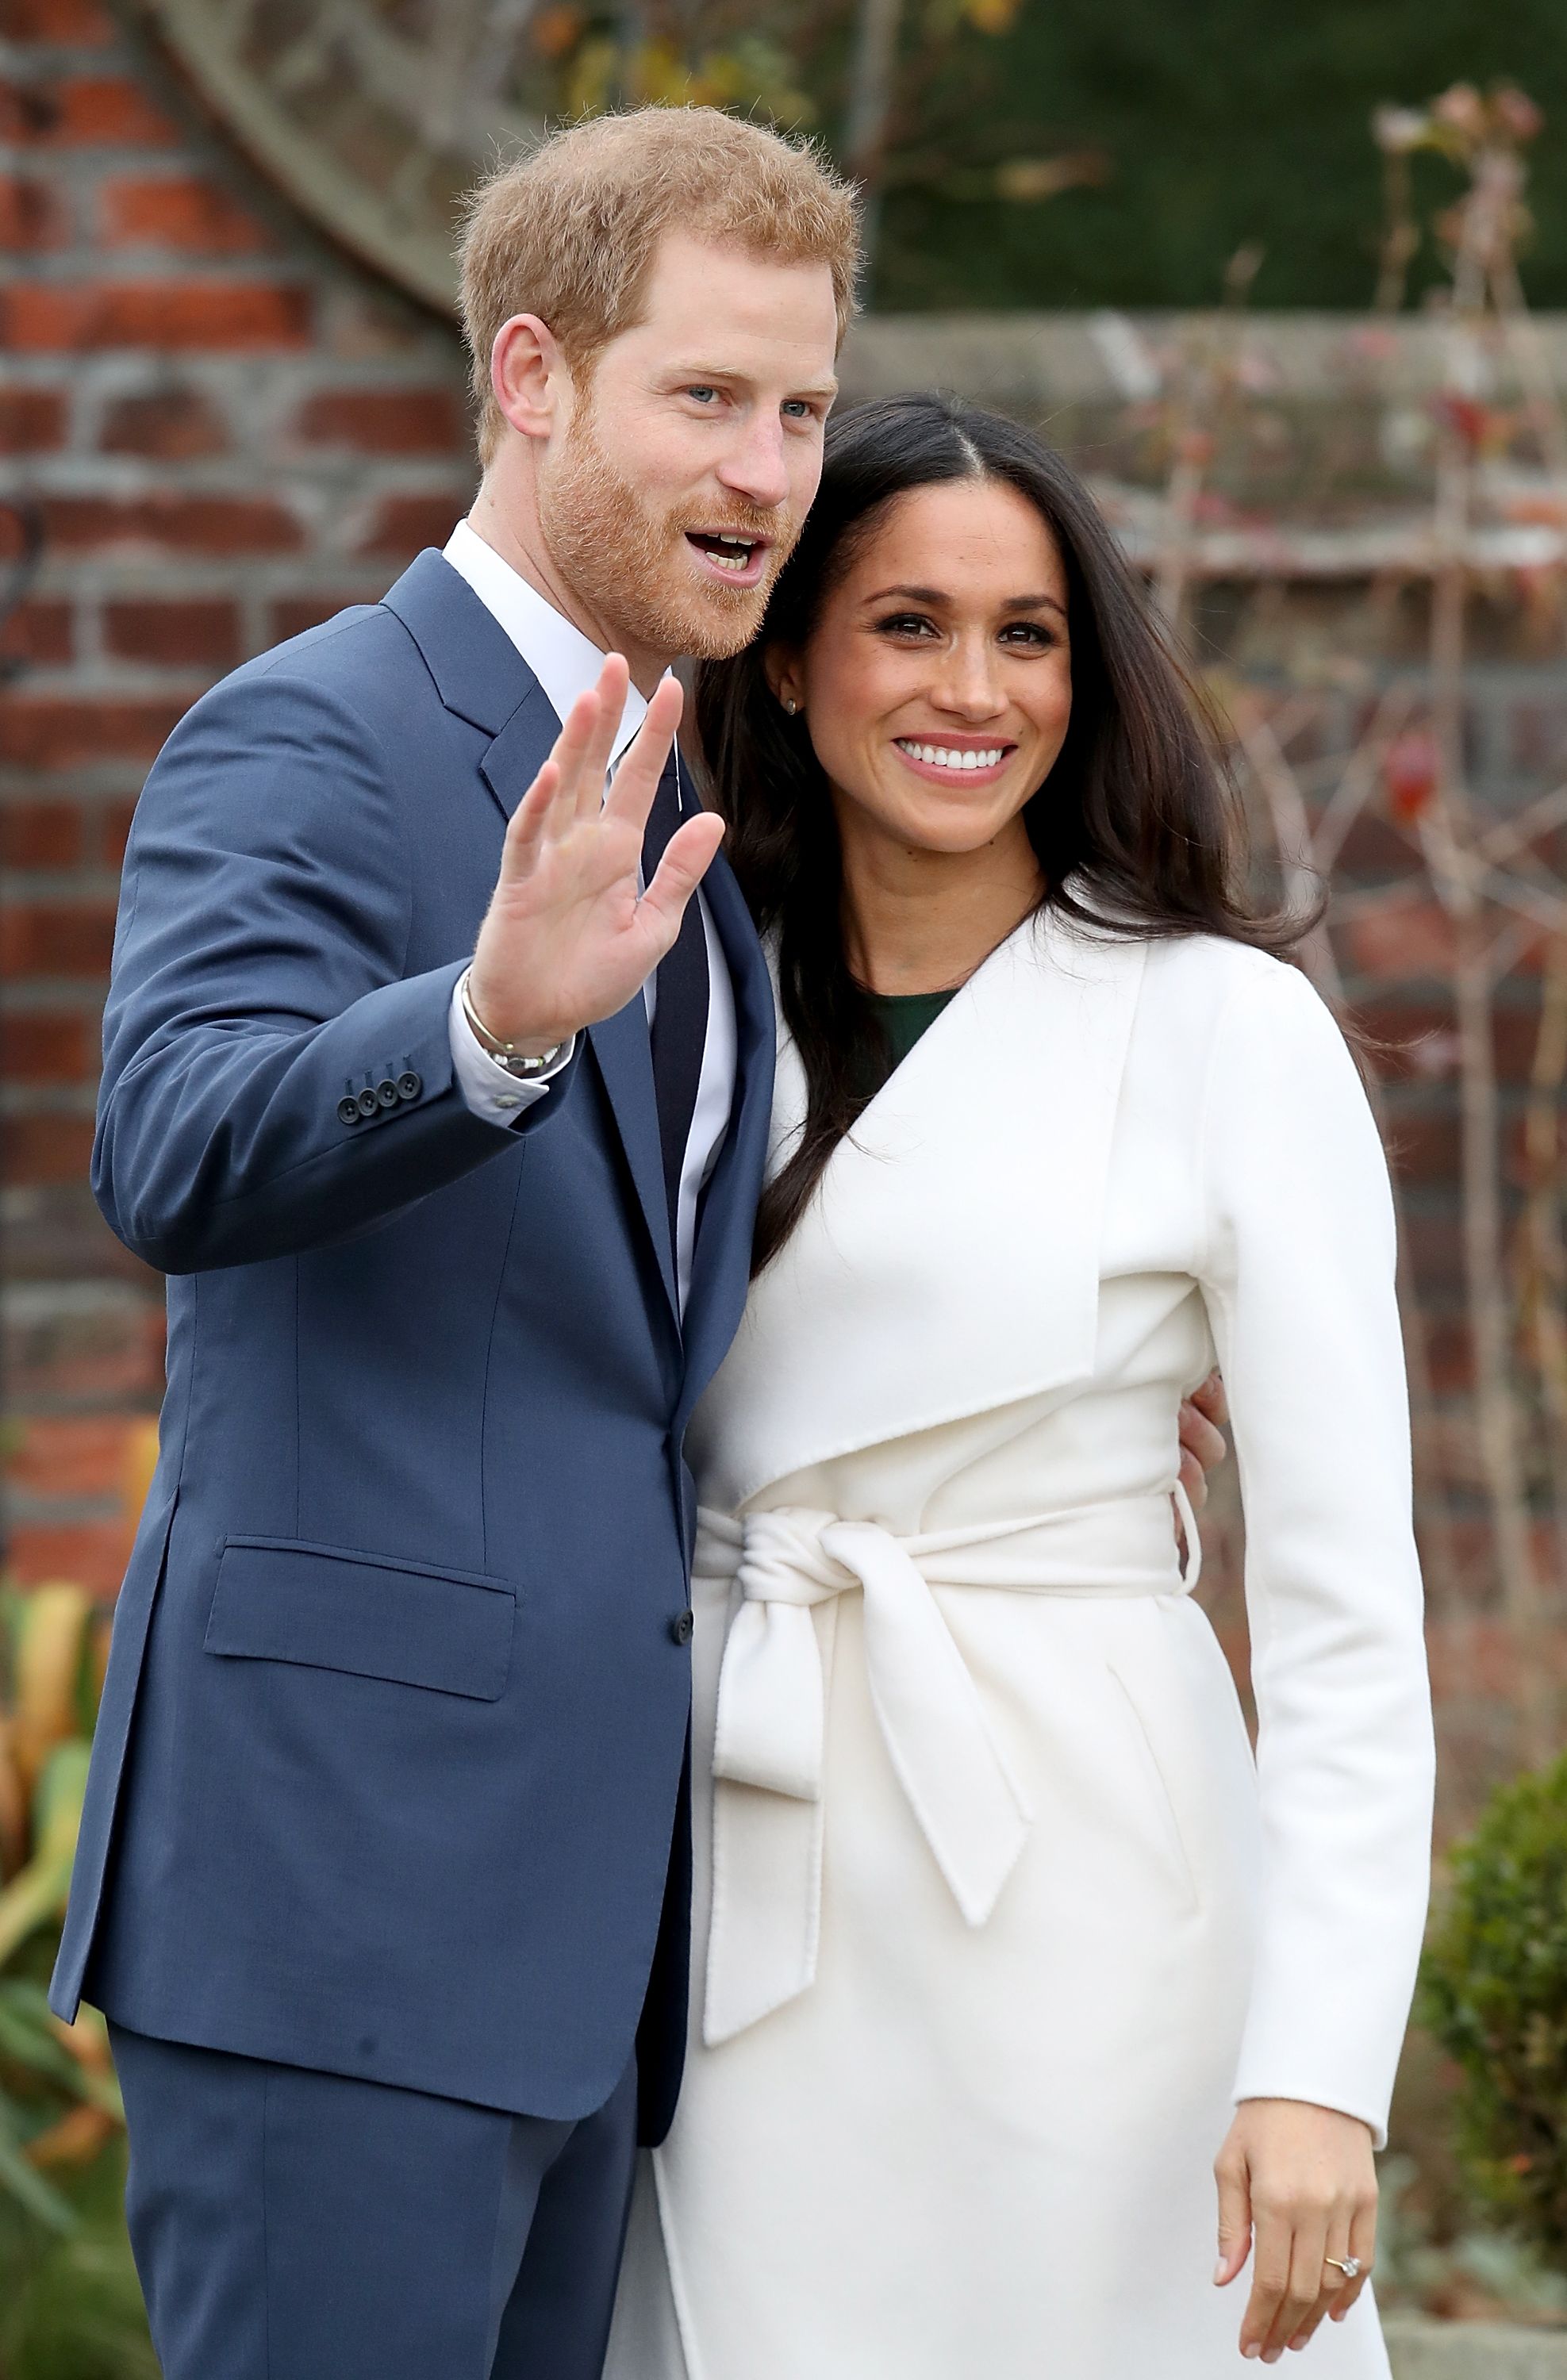 Prince Harry and Meghan Markle announce their engagement on November 27, 2017, in London, England. | Source: Getty Images